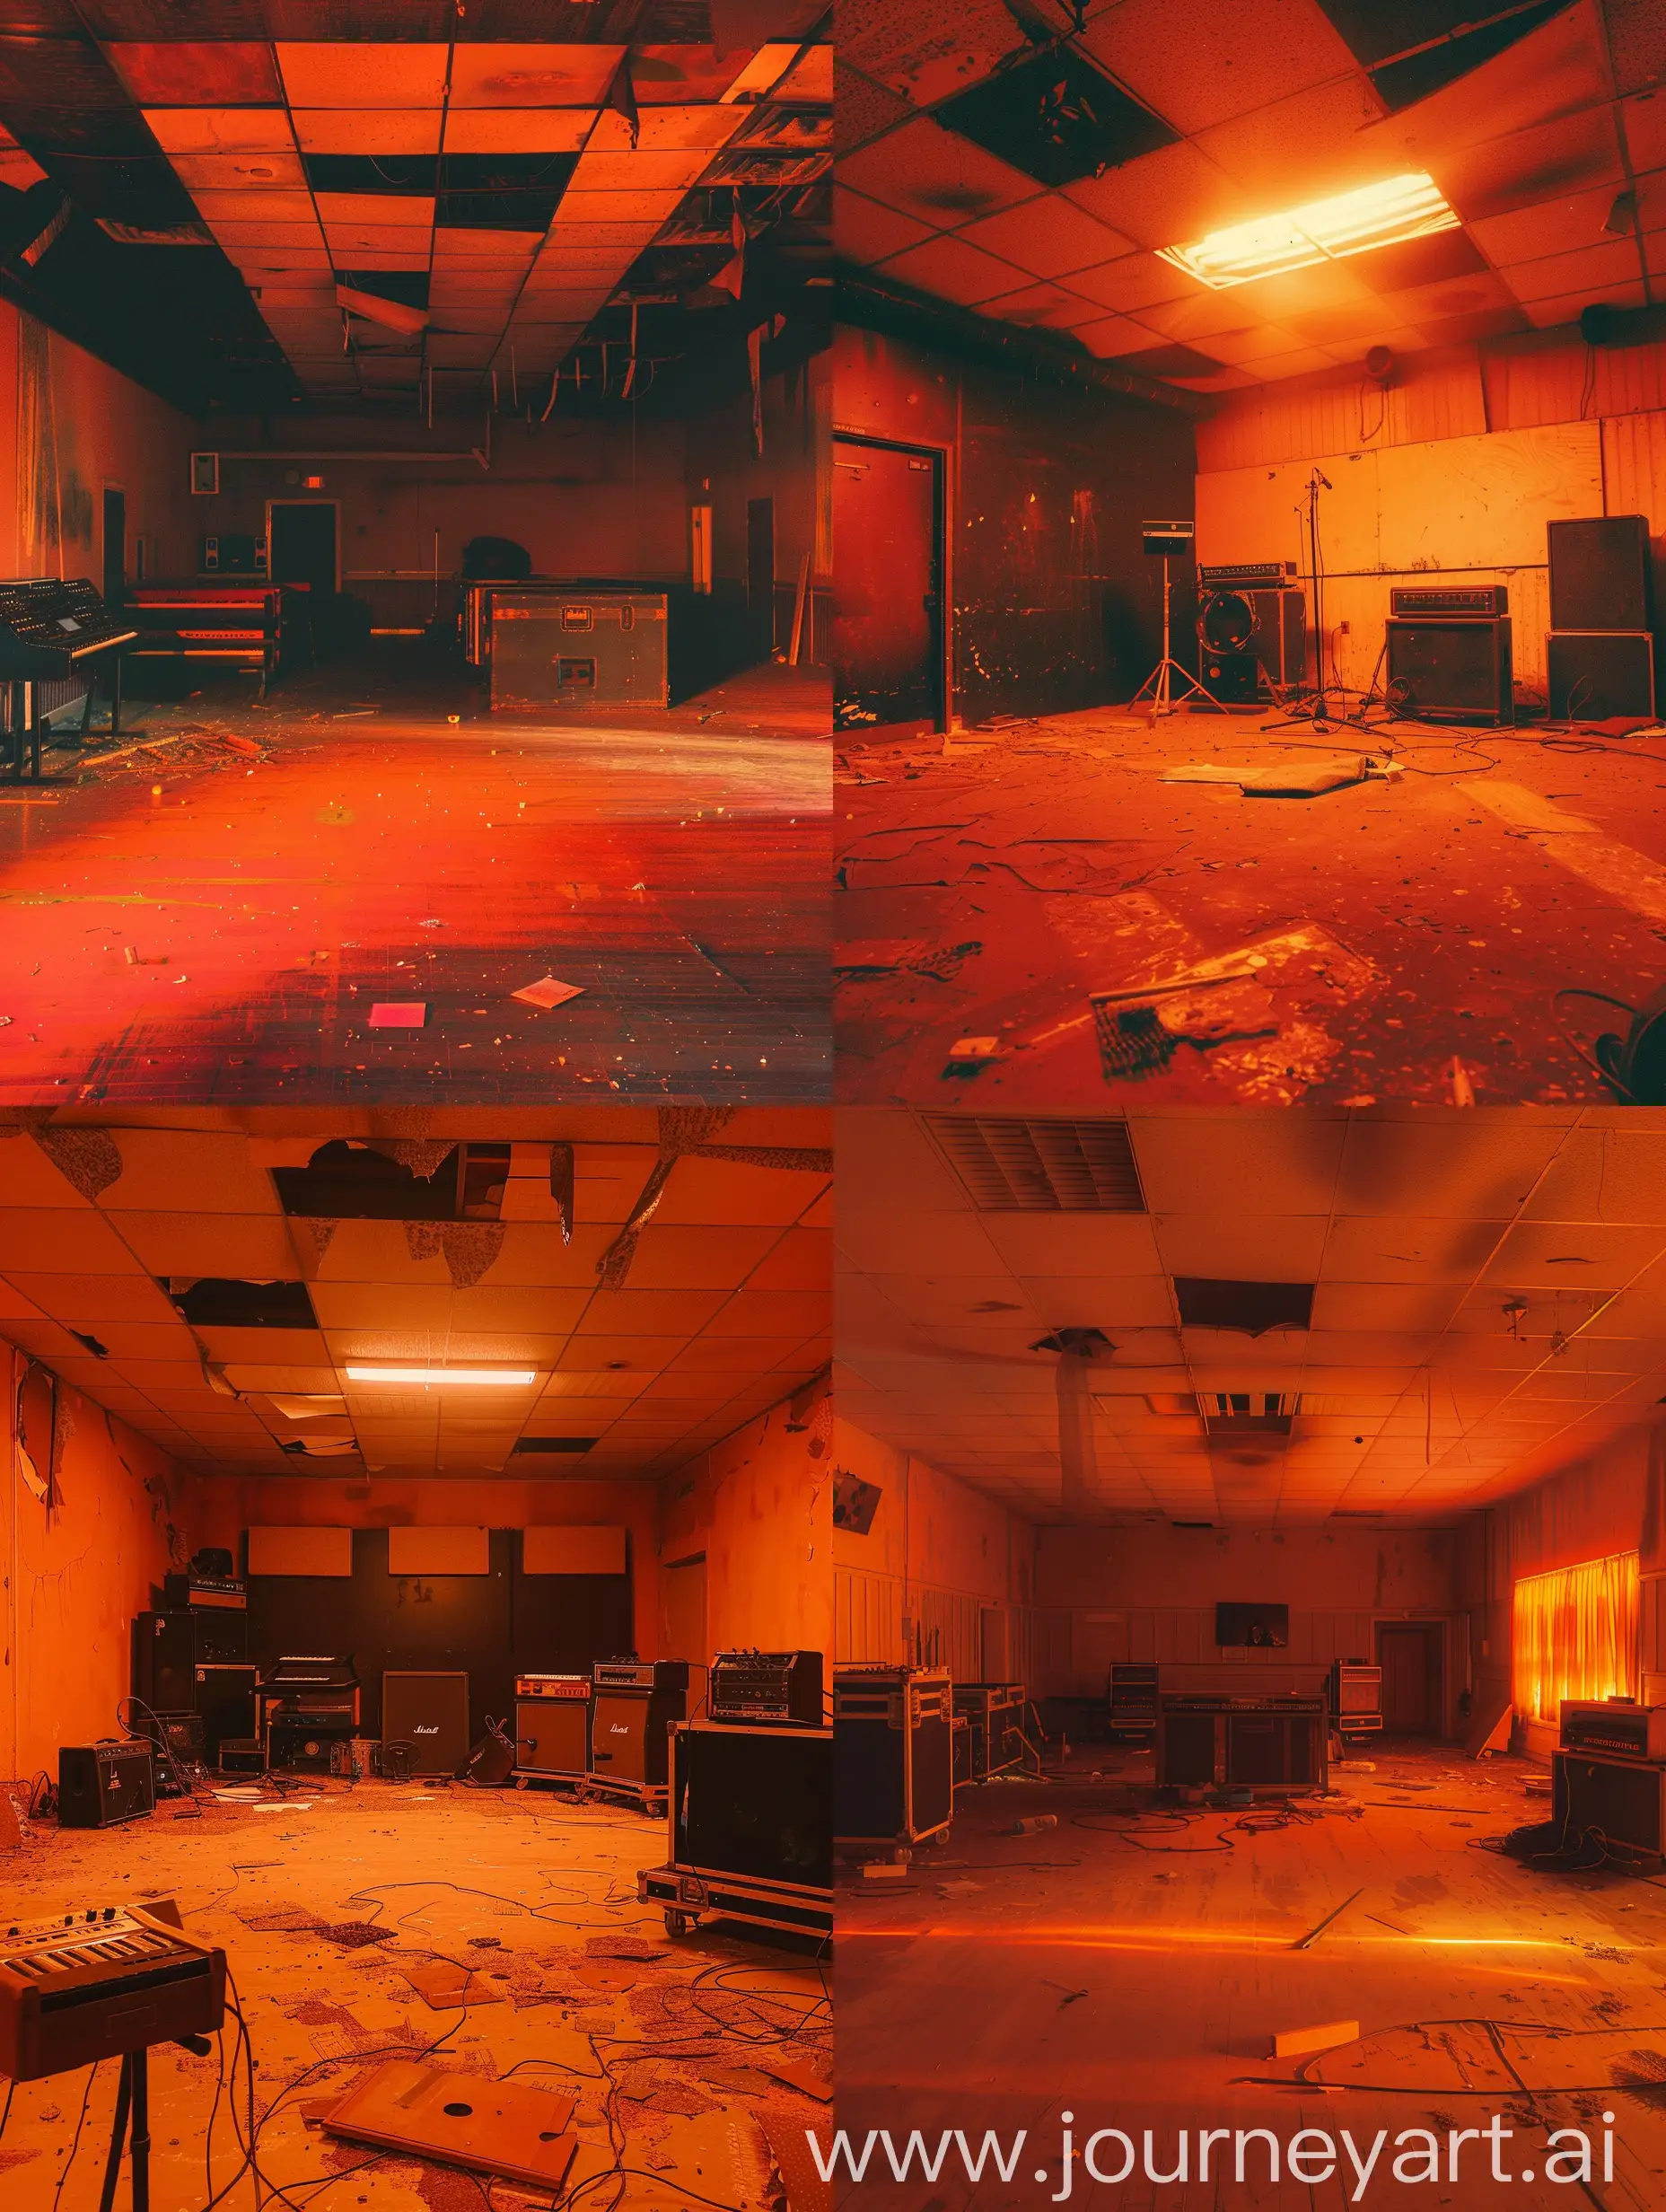 Early 2000s found footage, empty and eerie music studio, muted orange tones